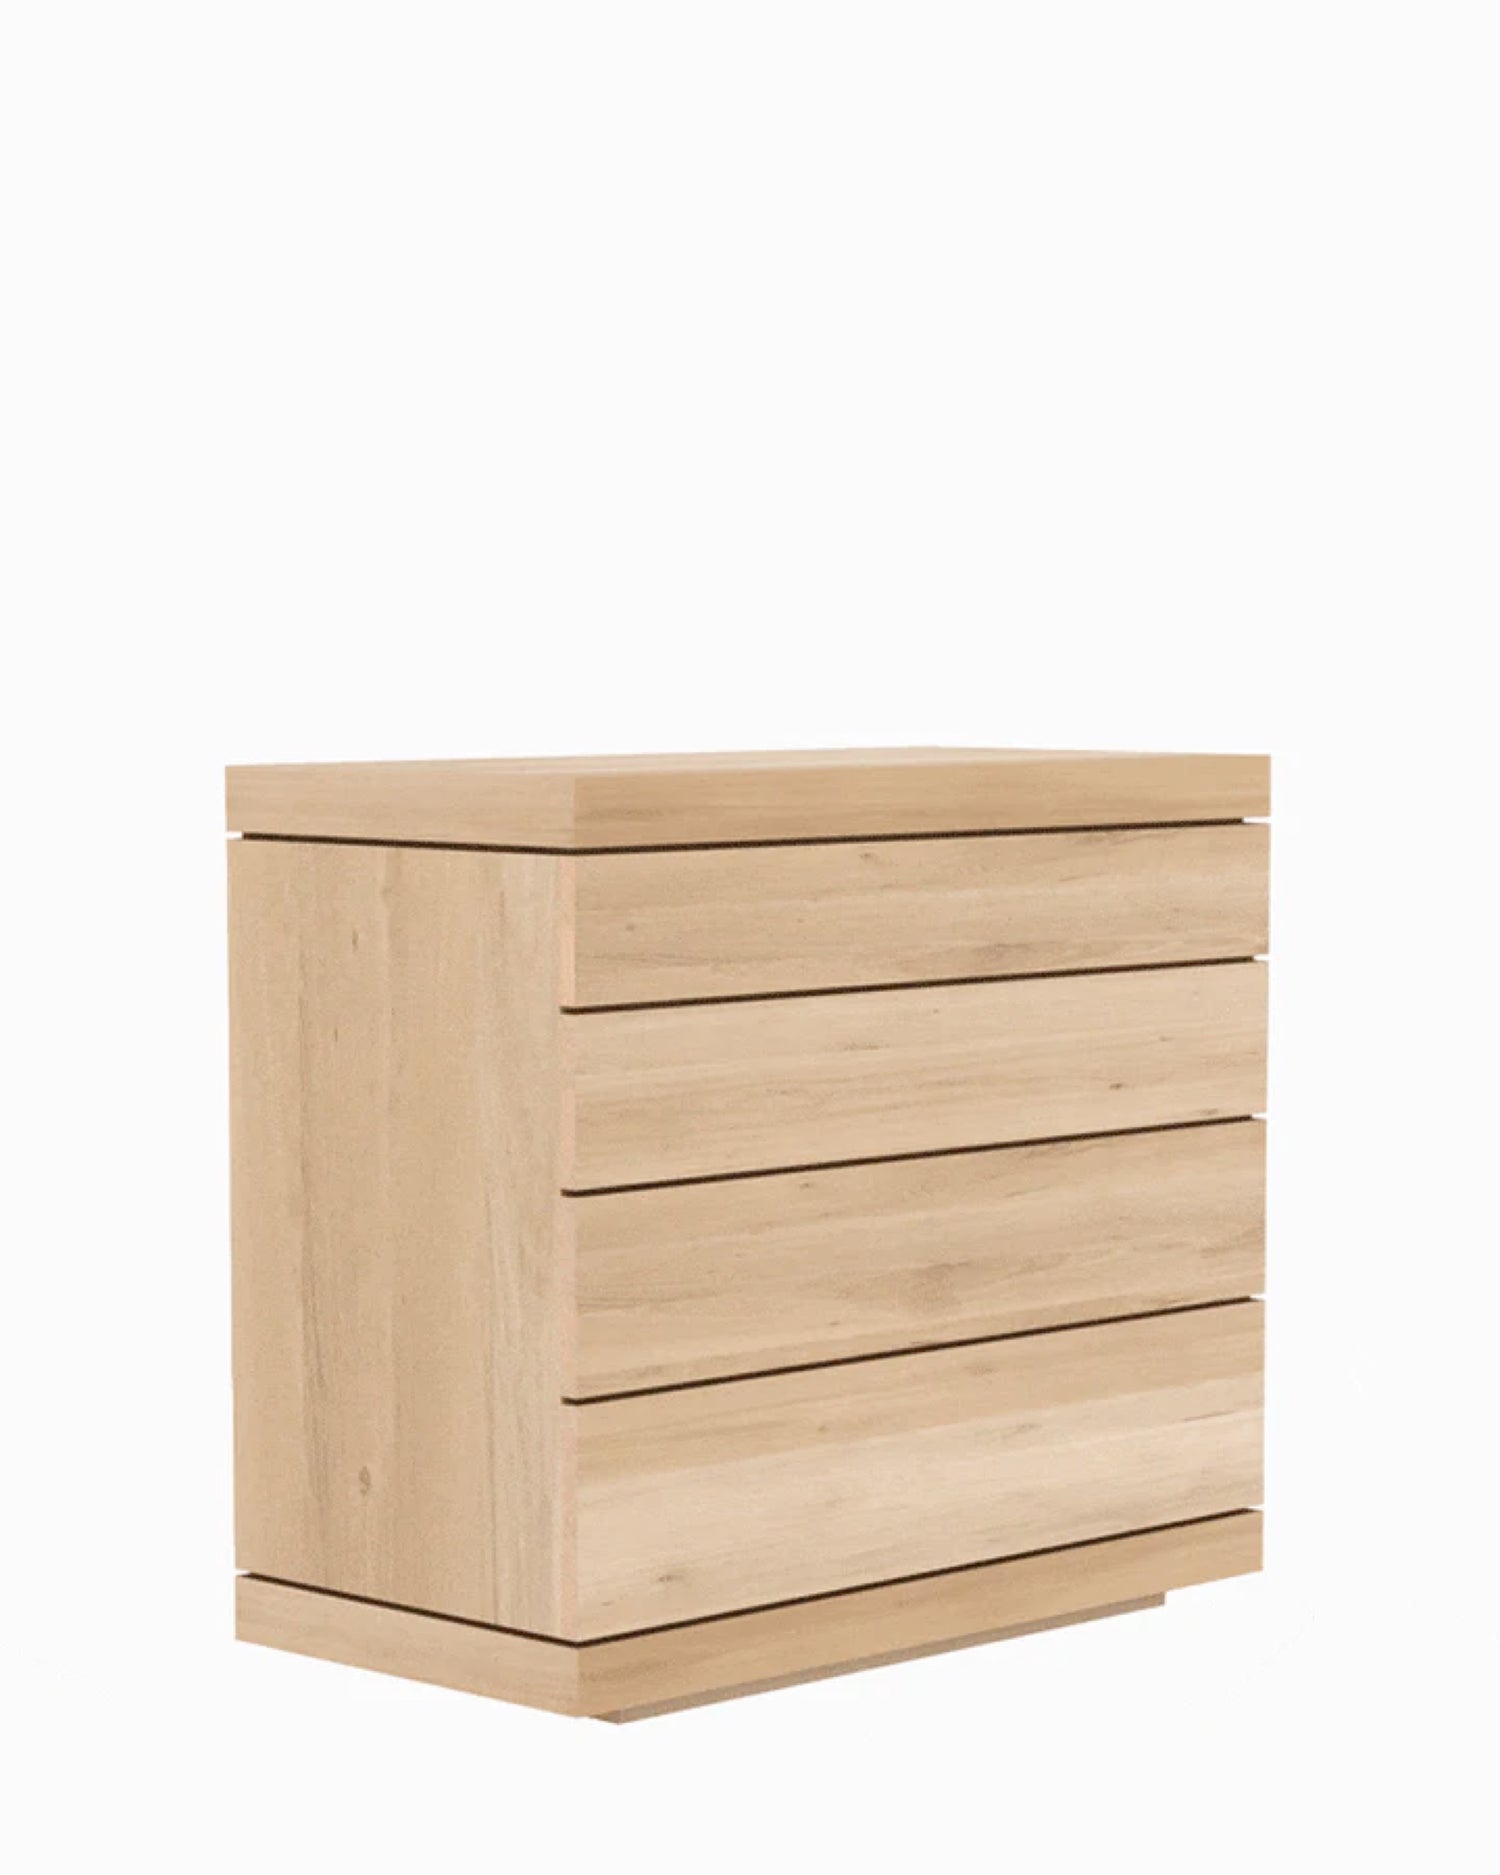 Luna Chest of Drawers